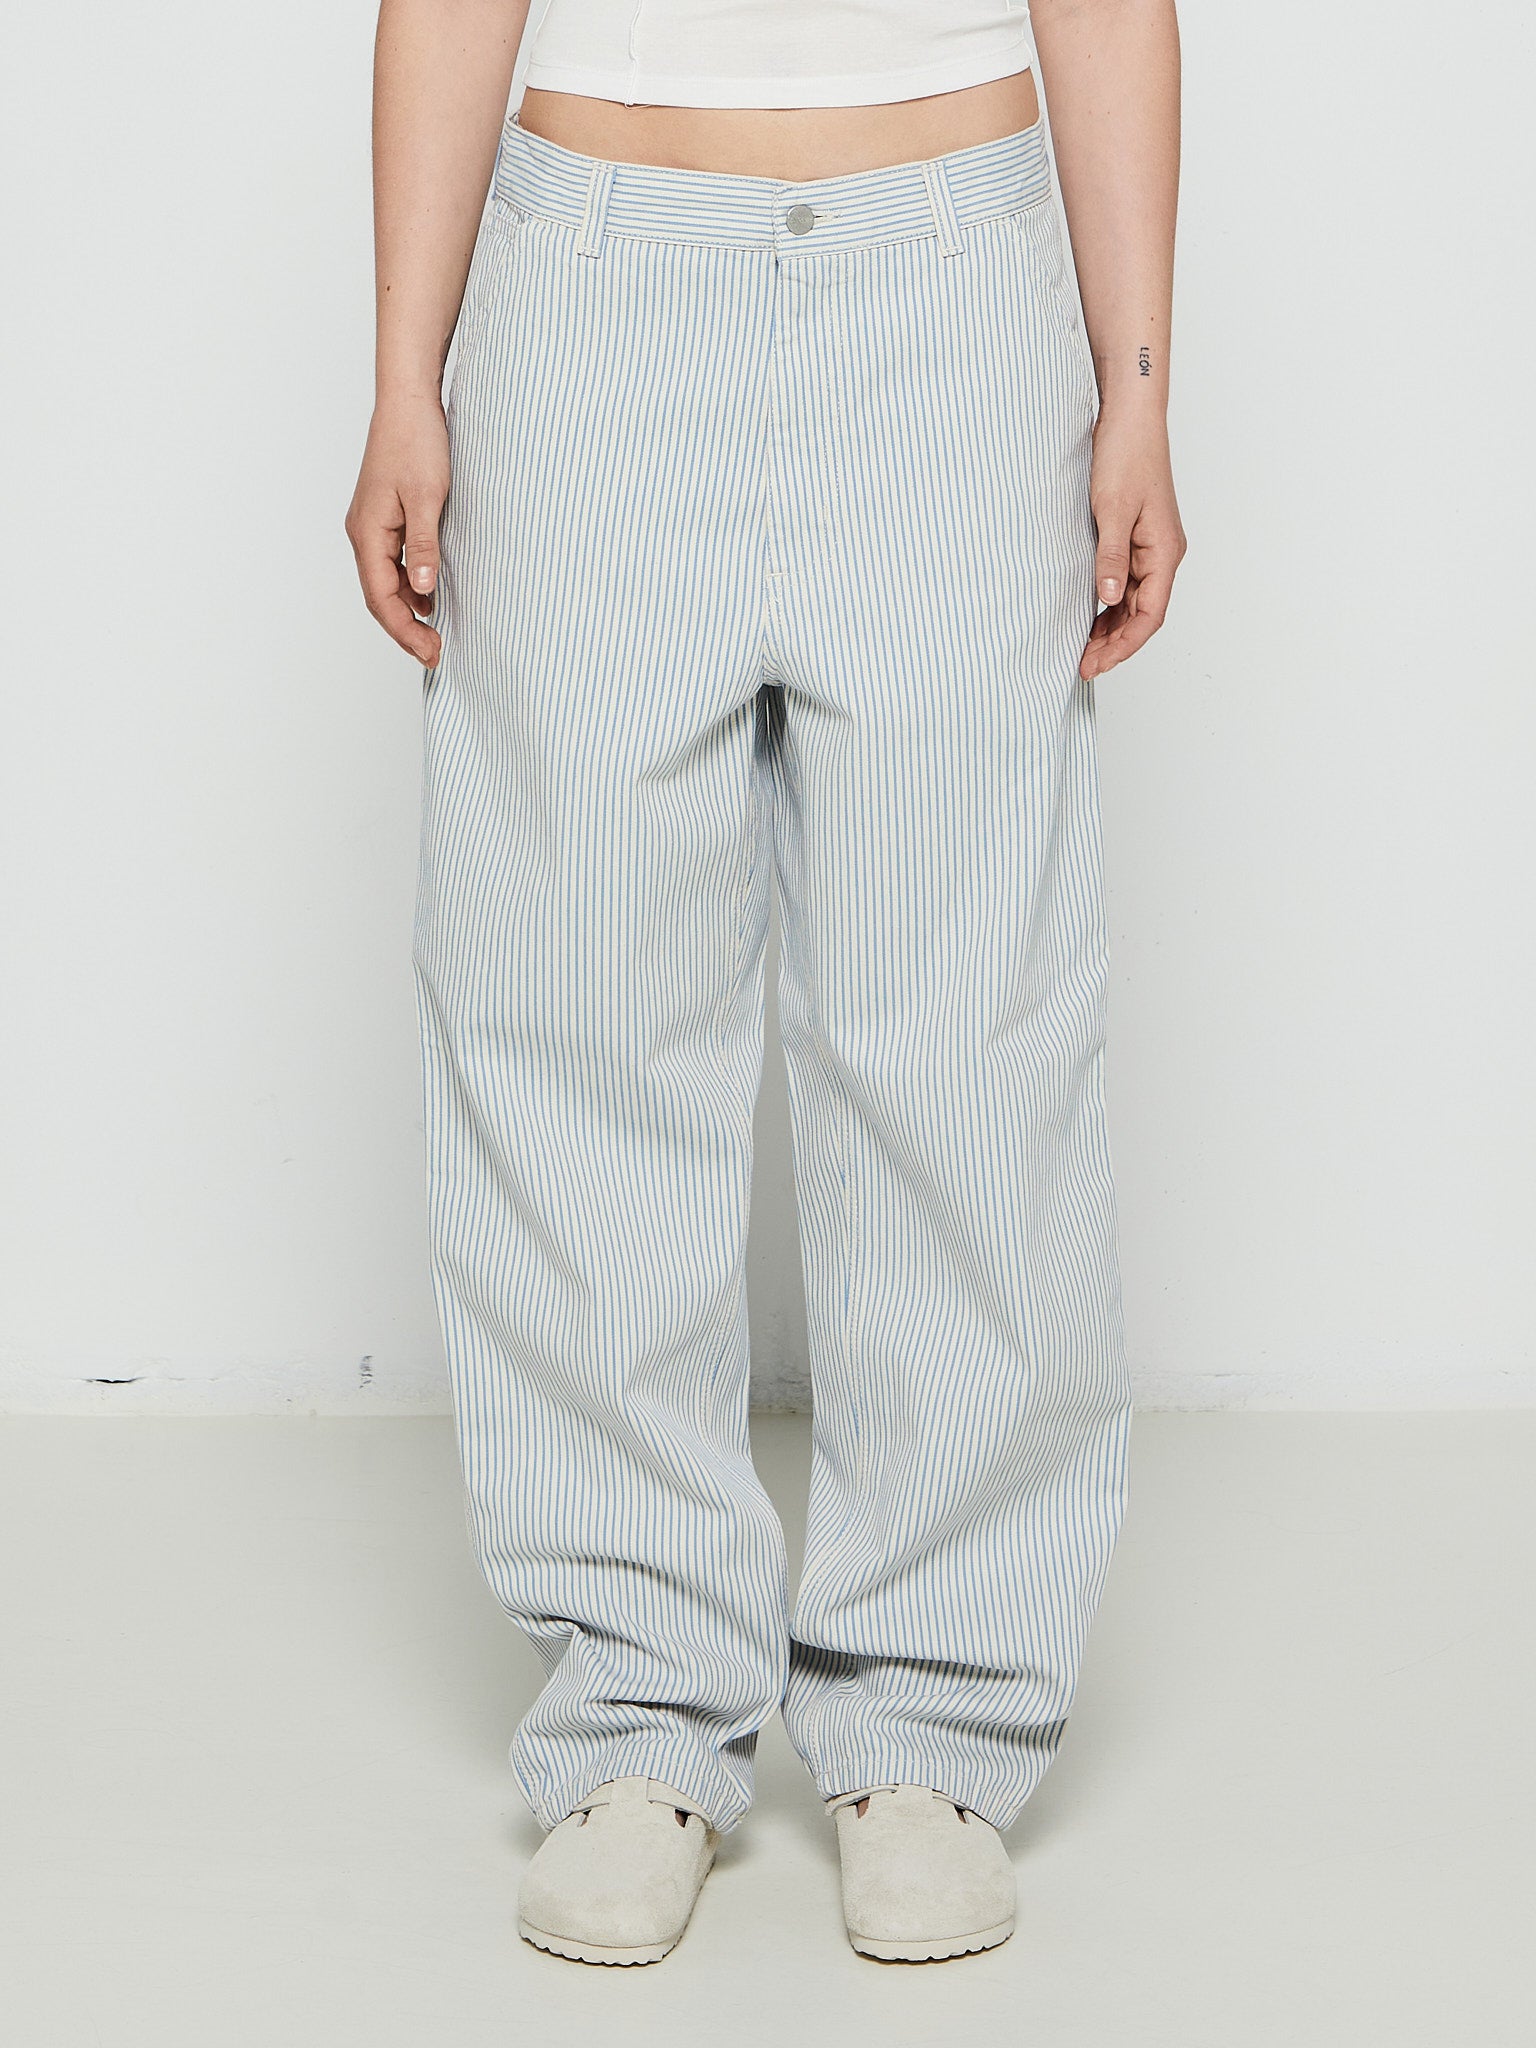 Carhartt - Terrell SK Pants in Wax and Bleach rinsed